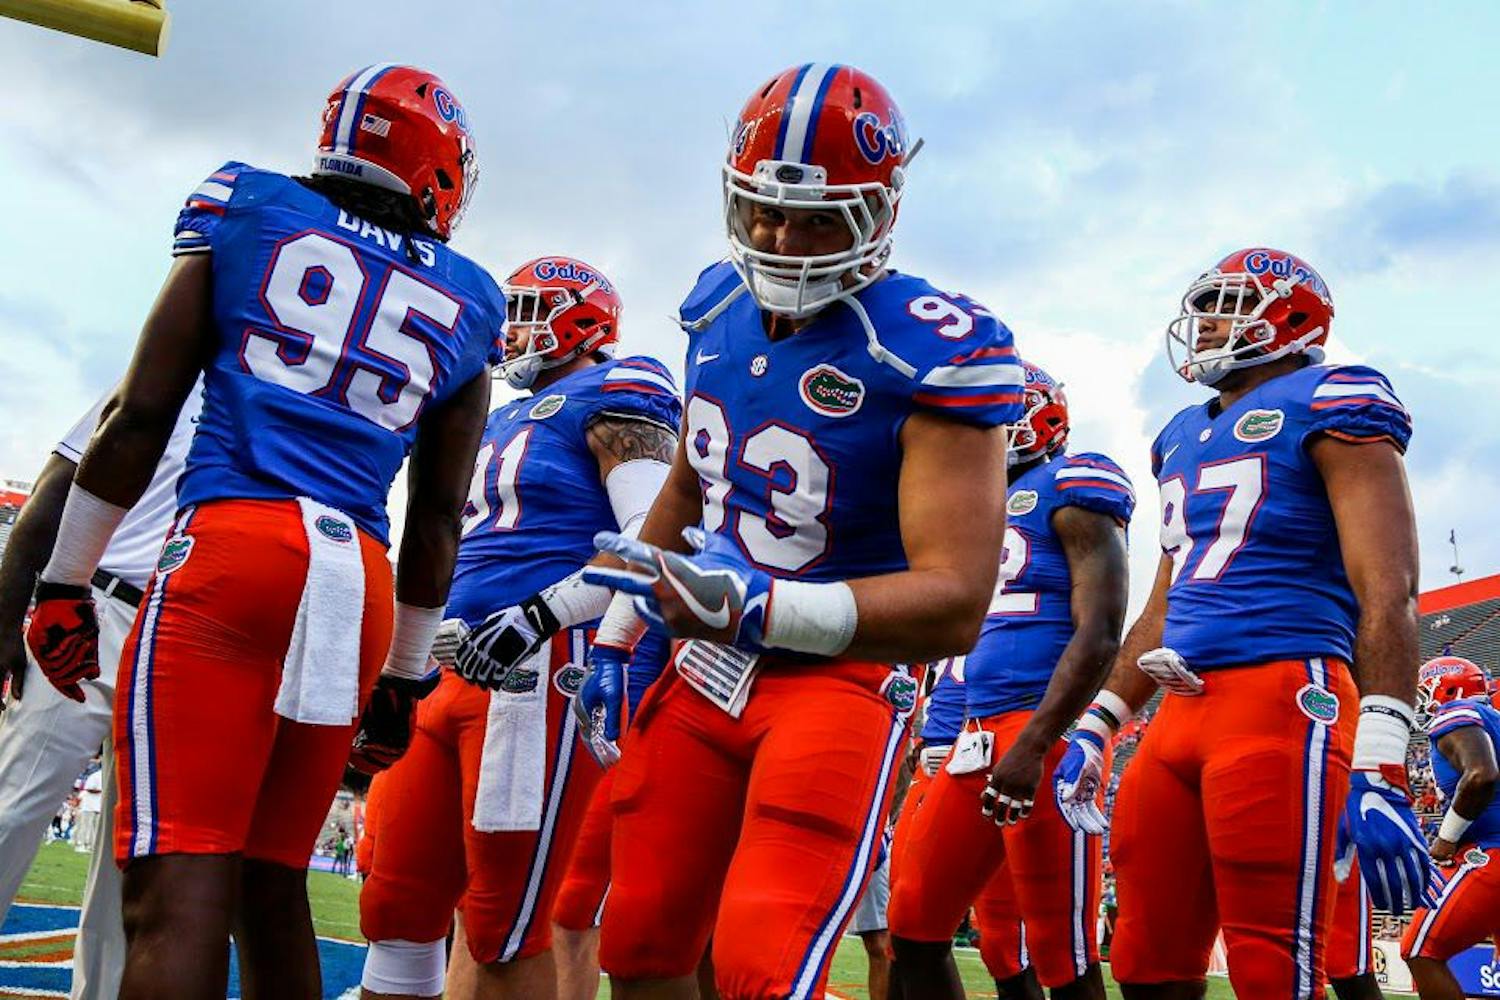 UF defensive tackle Taven Bryan before Florida's 32-0 win against North Texas on Sept. 17, 2016, at Ben Hill Griffin Stadium.